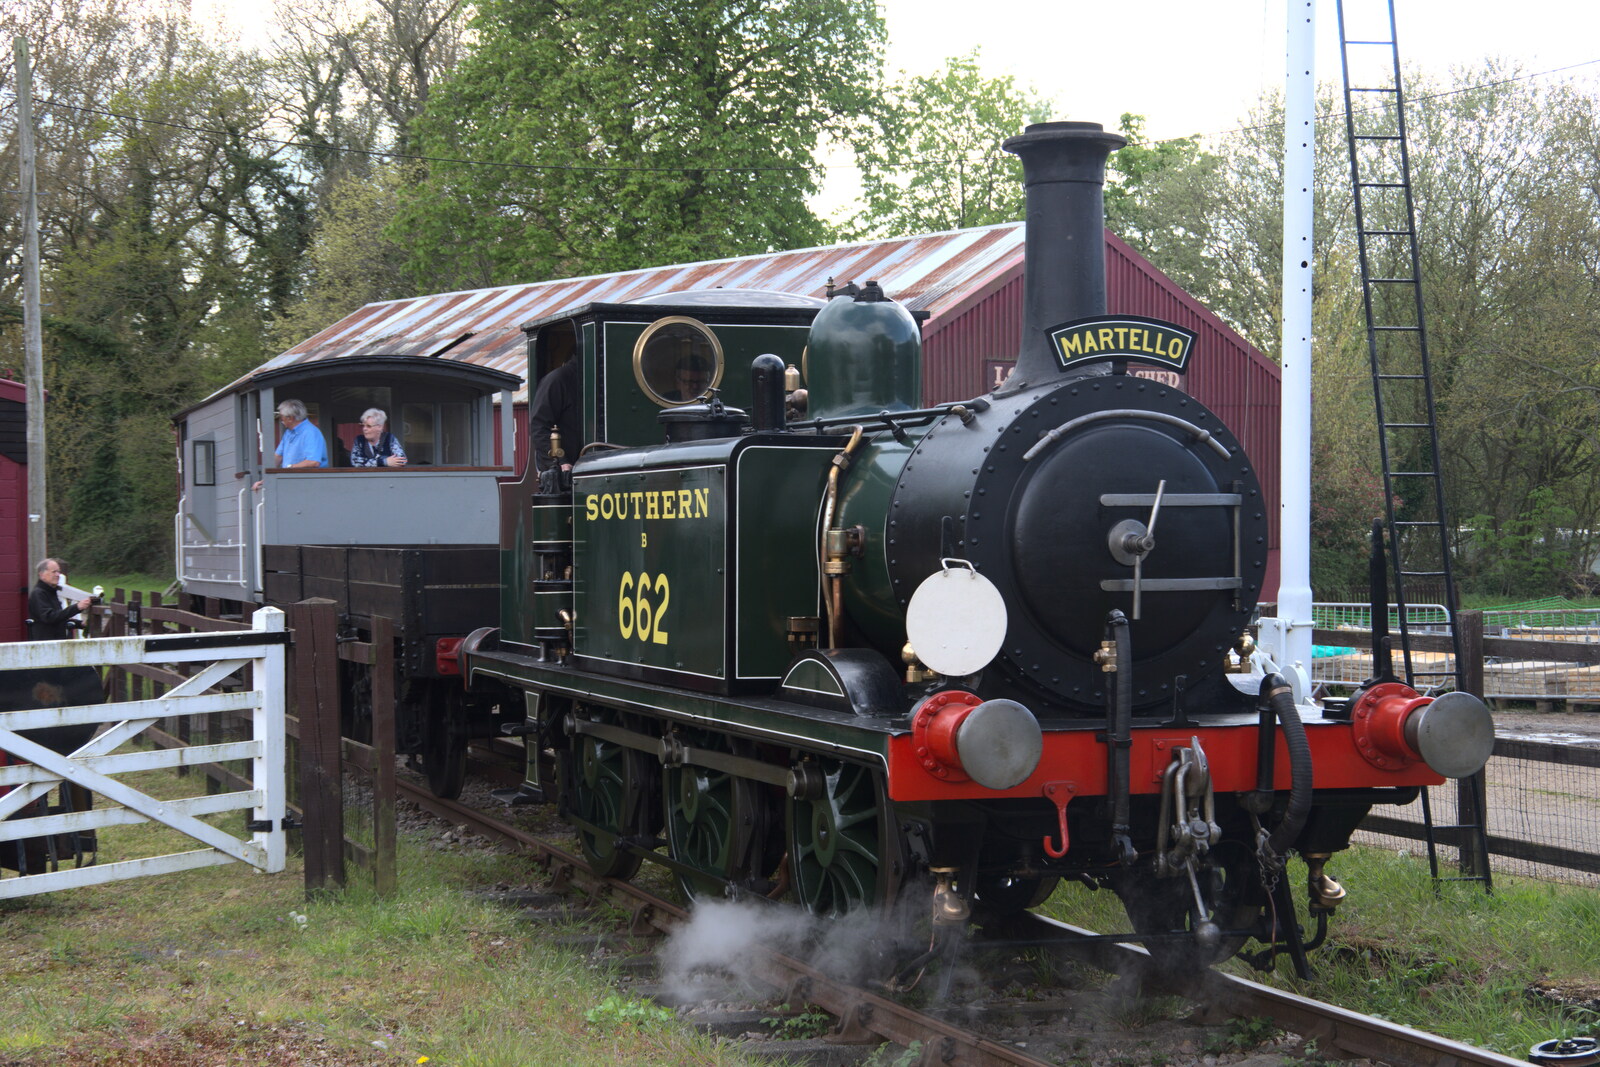 Another view of 662 Southern Martello from The Heritage Steam Gala, Bressingham Steam Museum, Norfolk - 1st May 2023